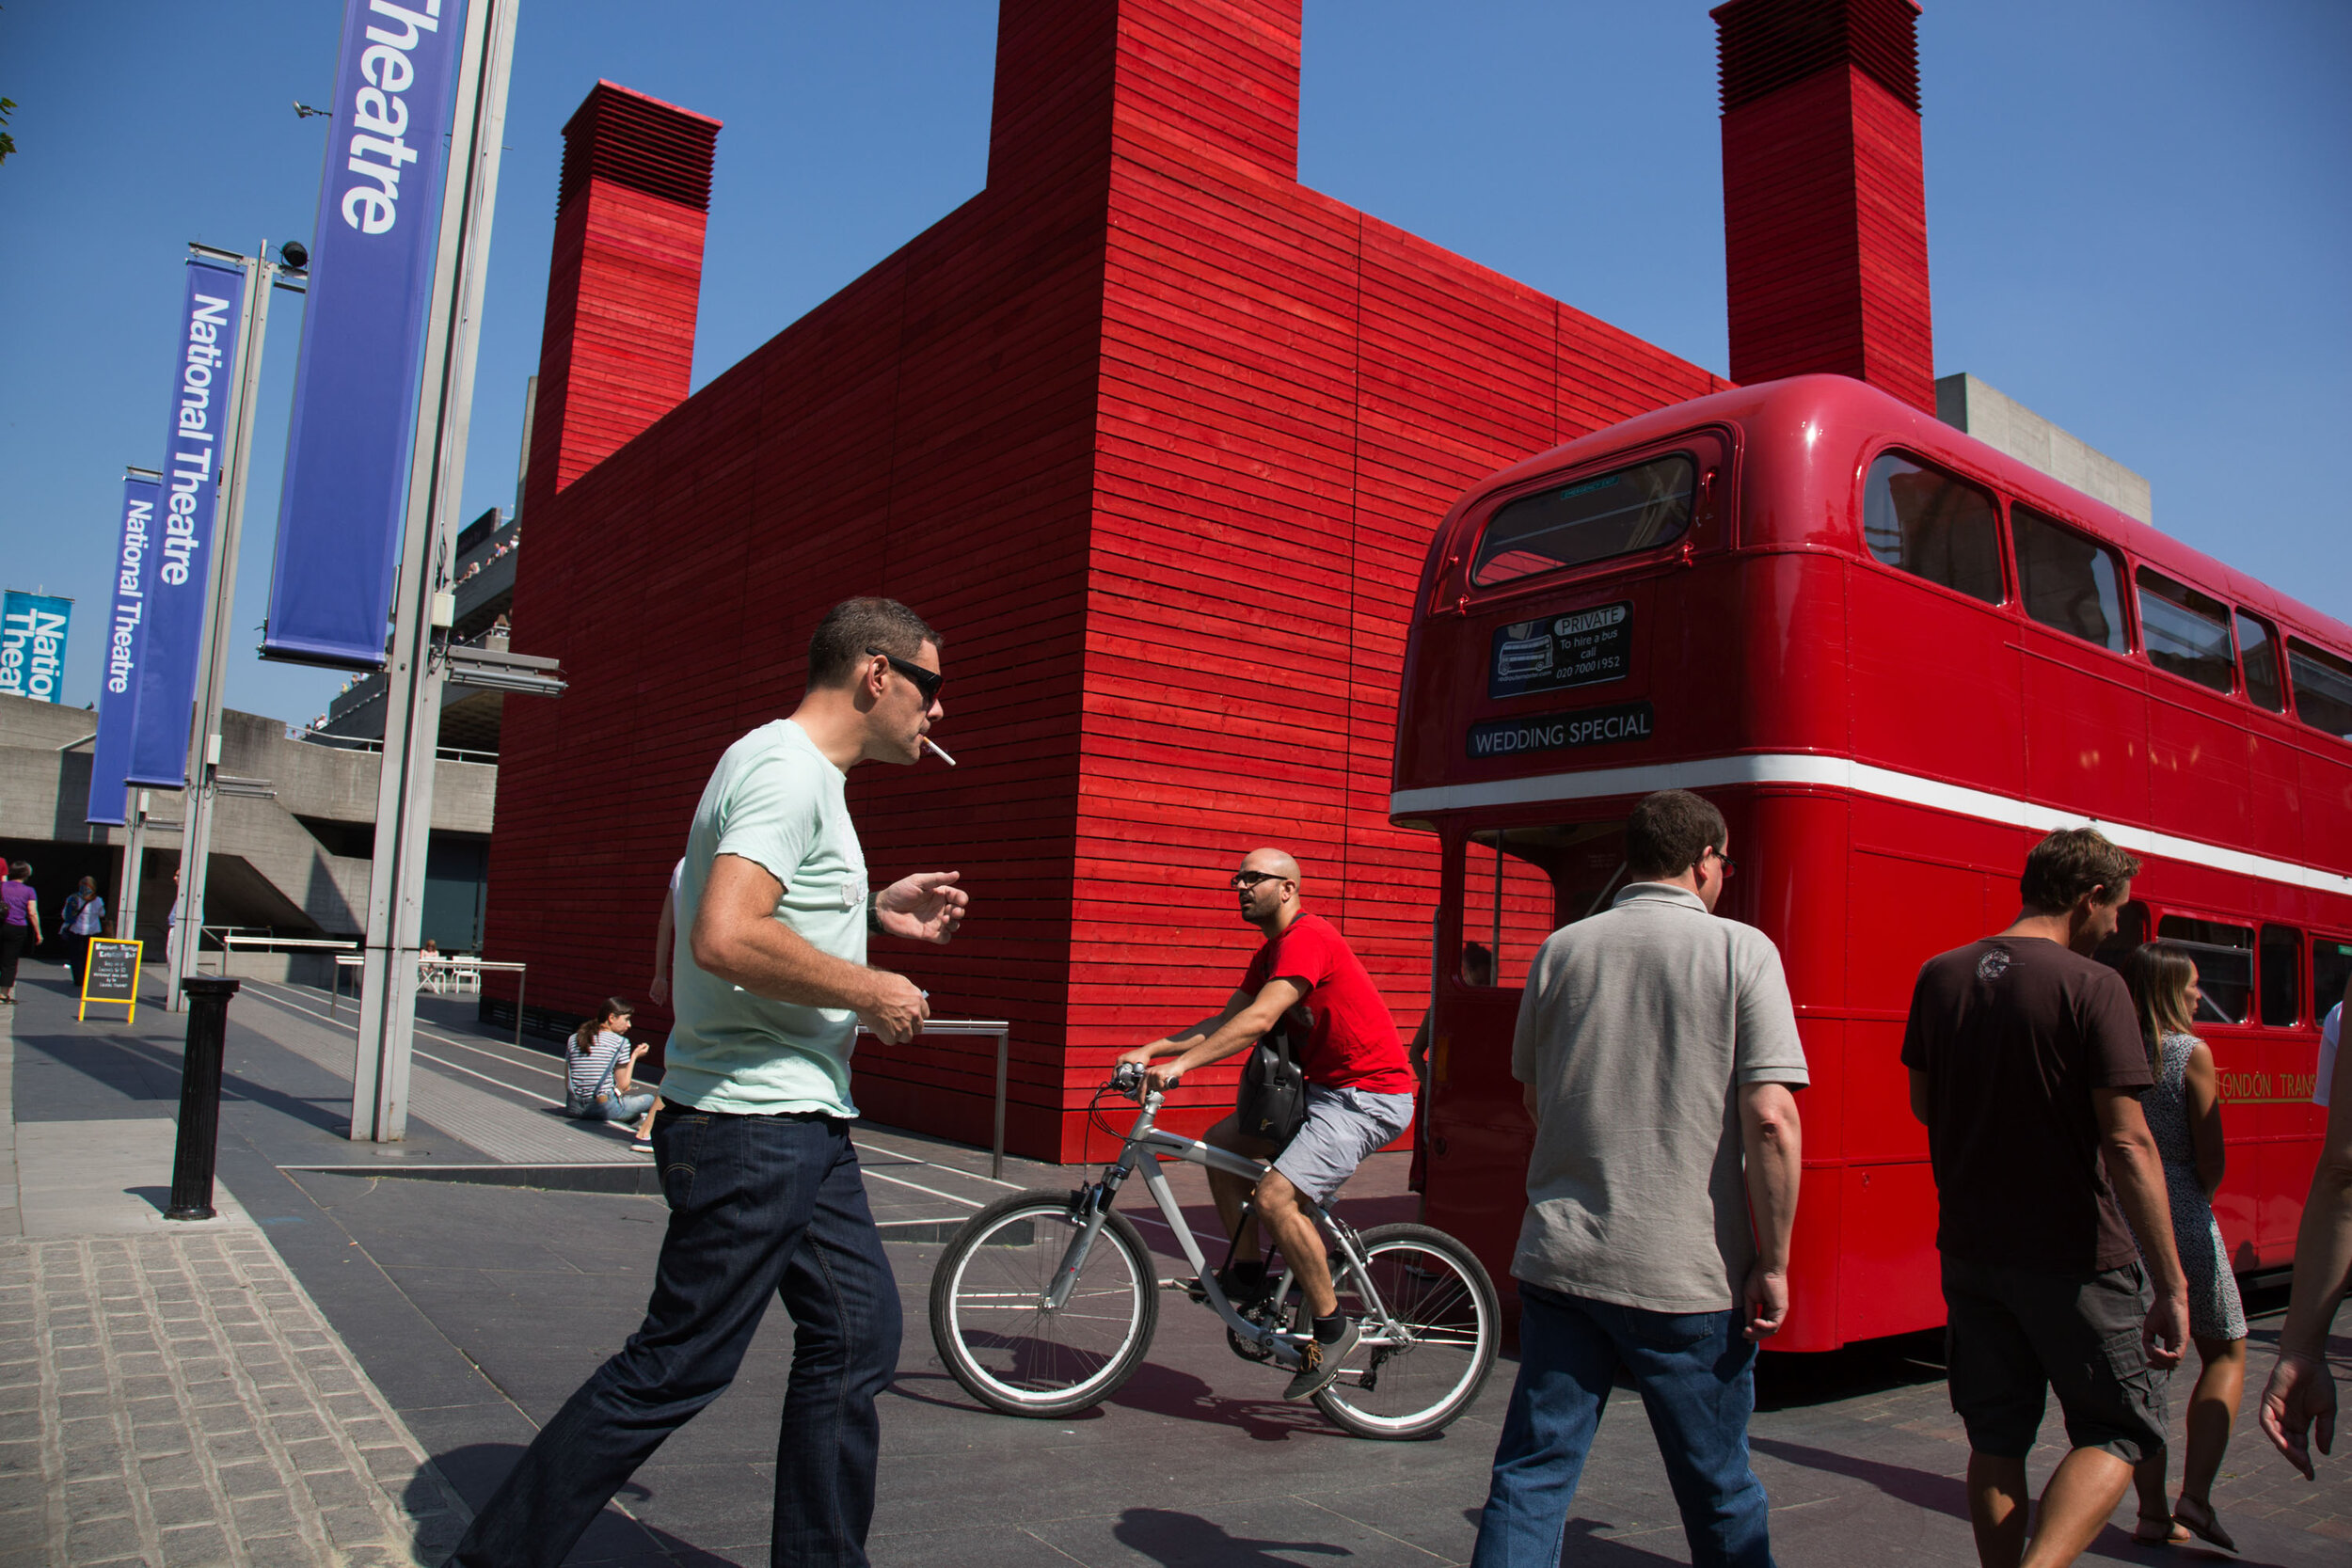 20130706_south bank red bus shed theatre_B.jpg